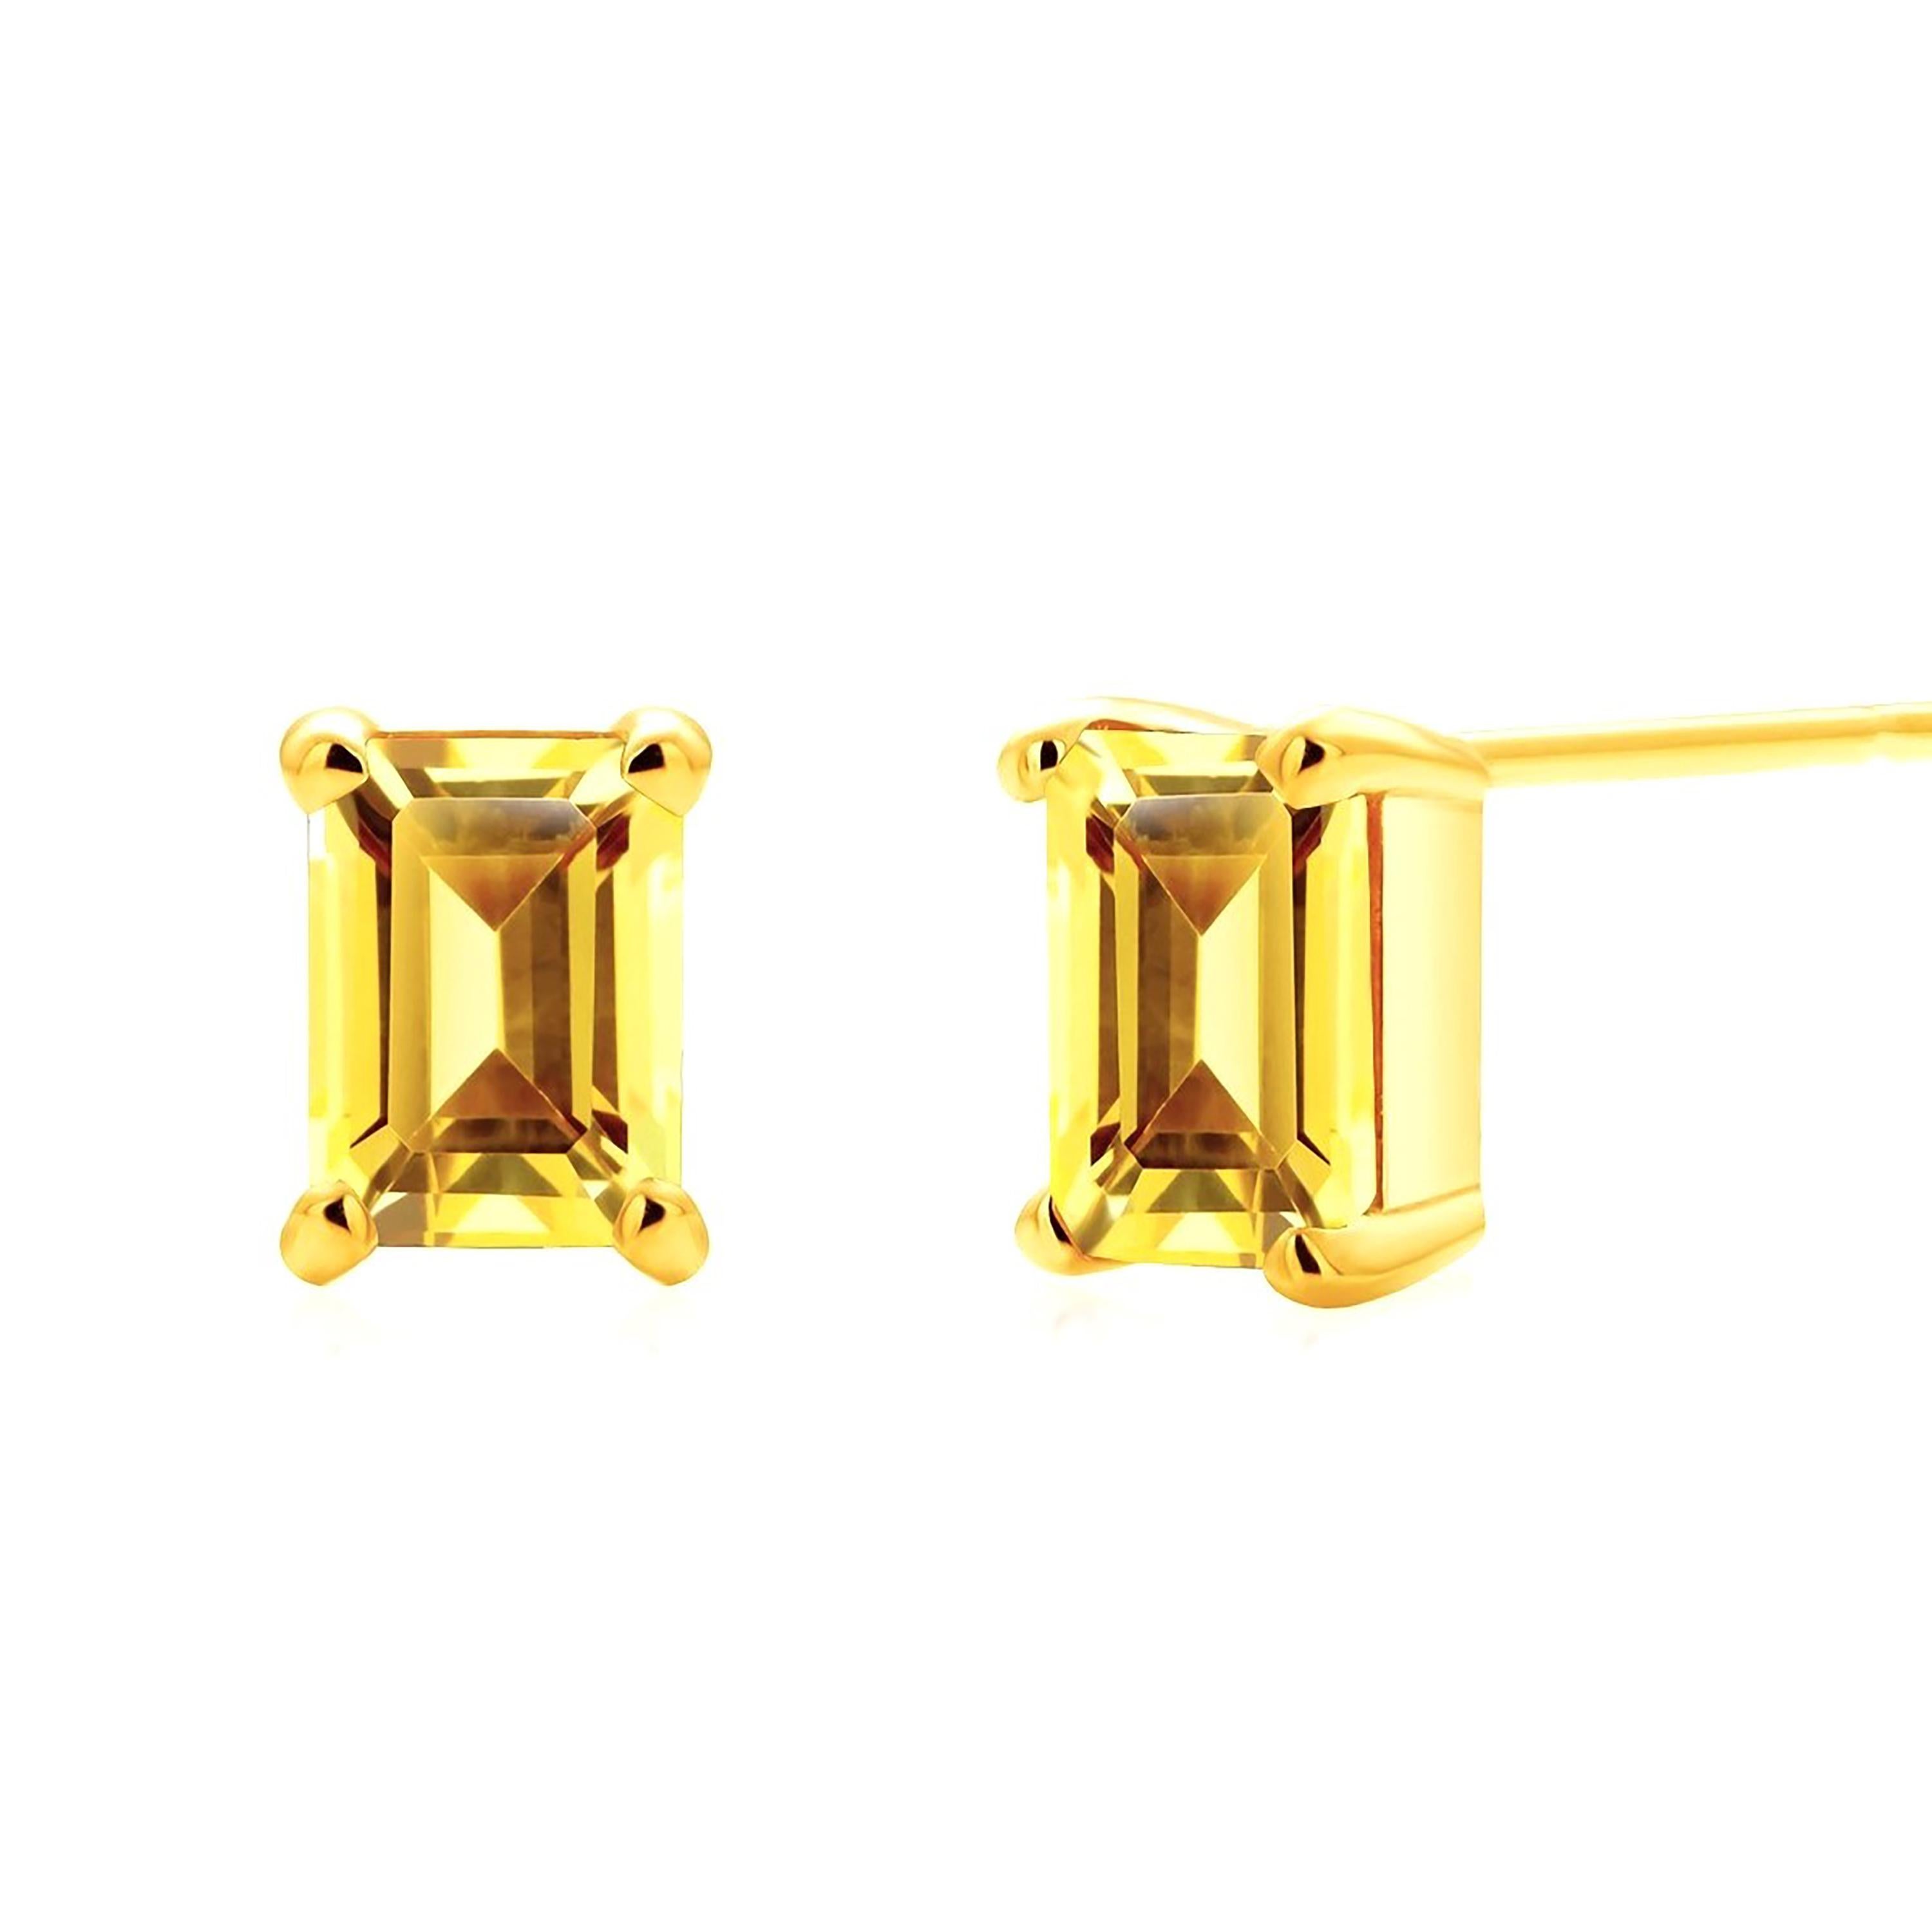 Emerald Shaped Ceylon Yellow Sapphire Gold Stud Earrings Weighing 1.70 Carats 1